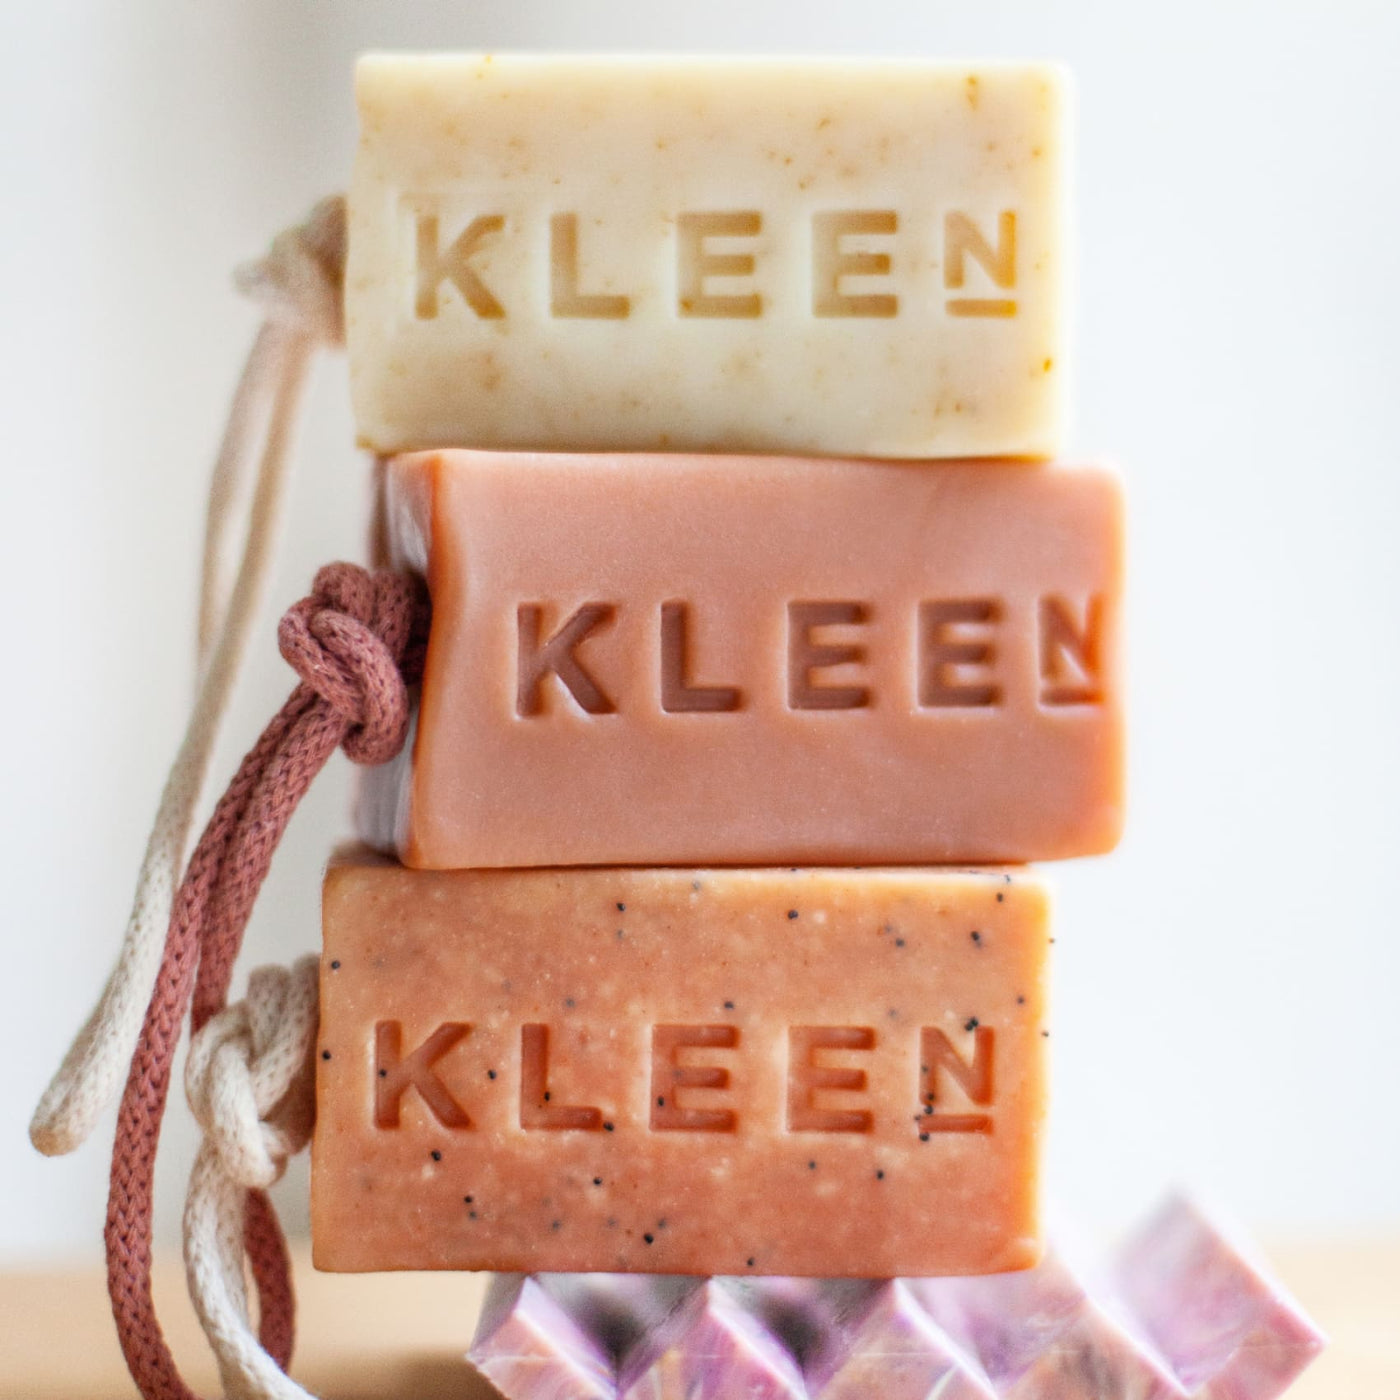 Kleen - Footloose Soap on a Rope